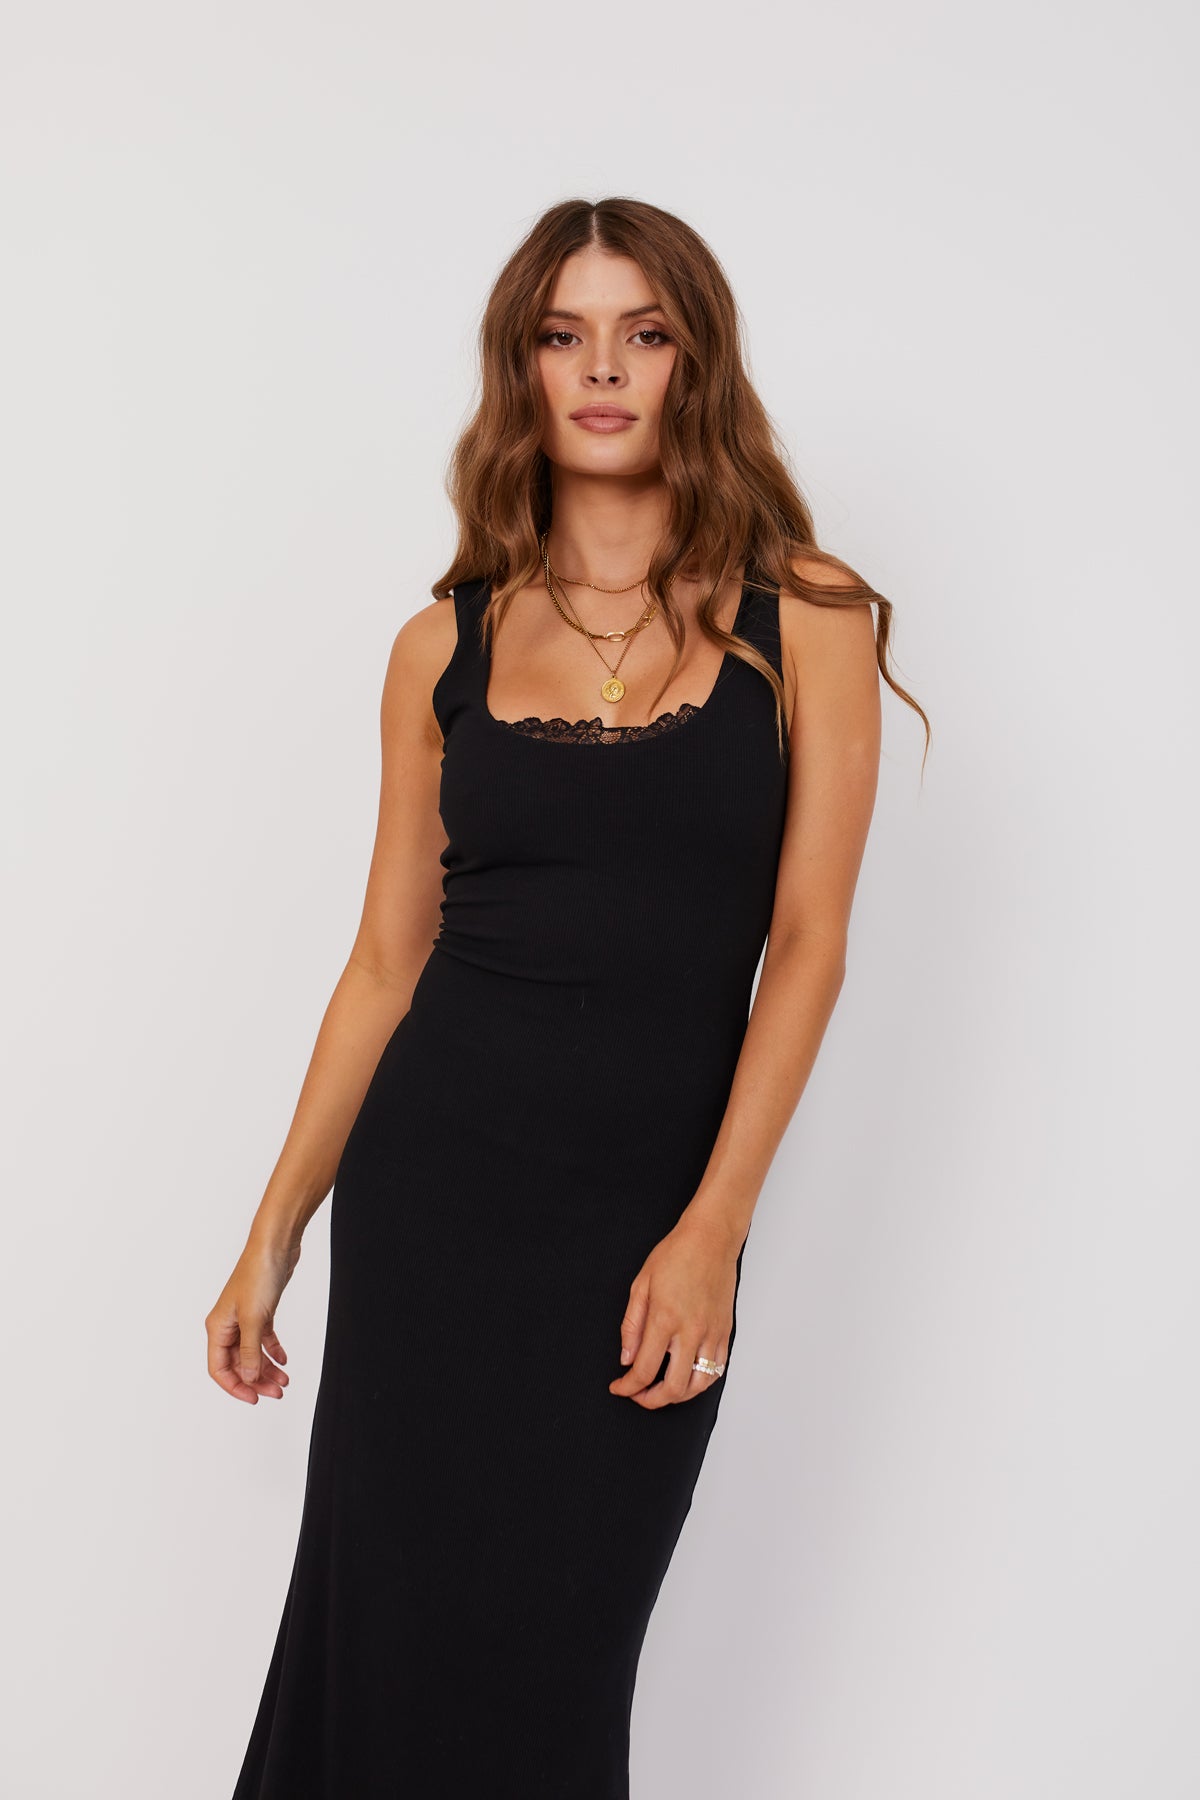 LOVE AND LACE BLACK RIBBED MAXI DRESS